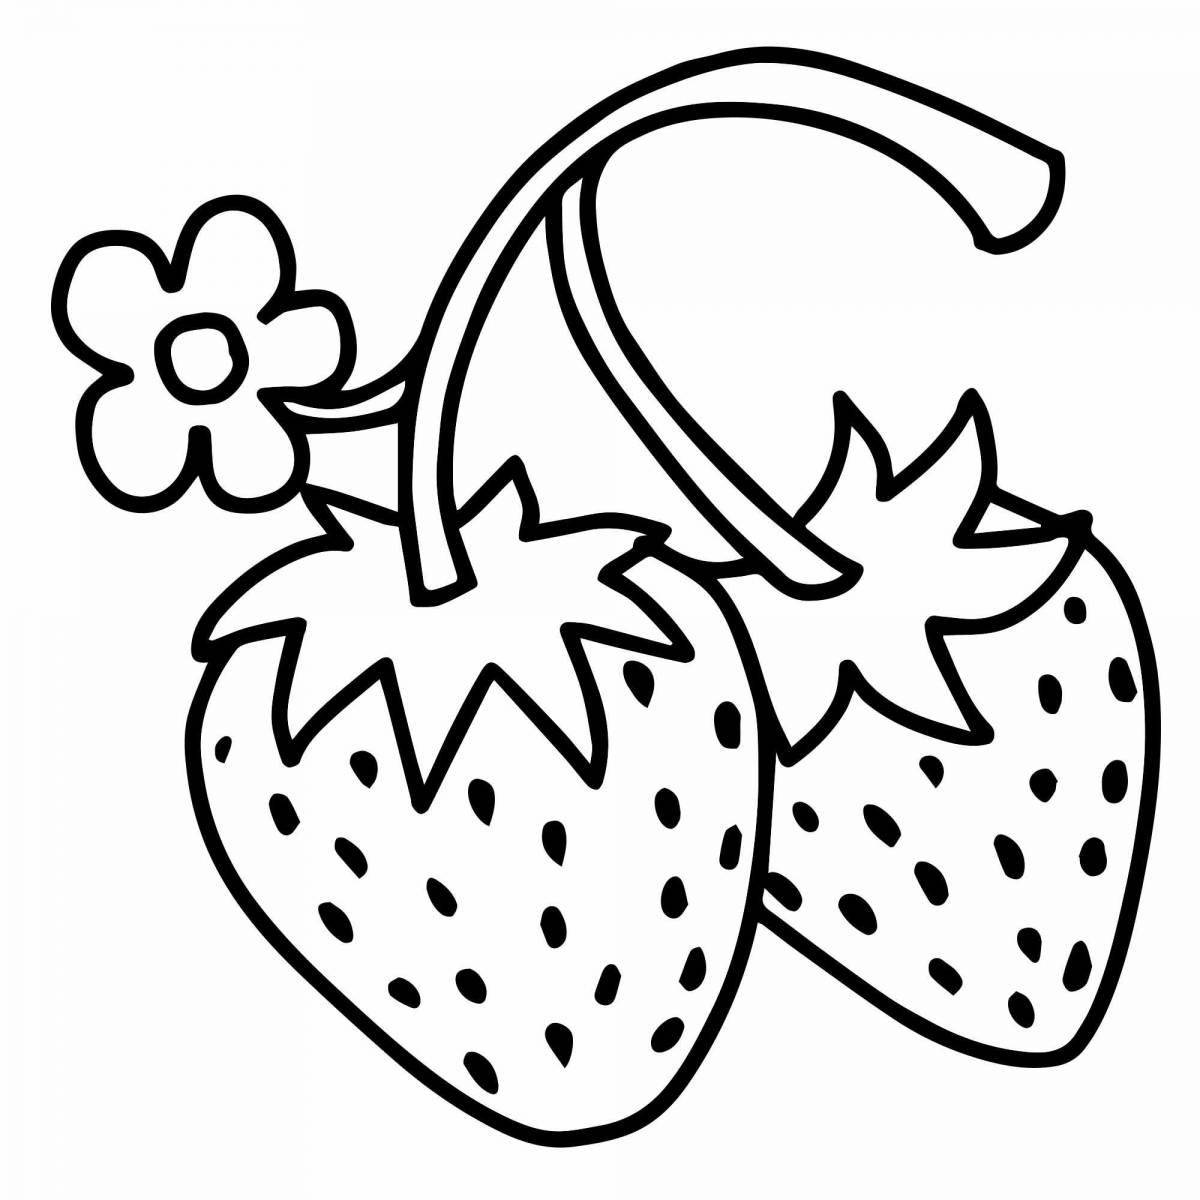 Coloring page strawberries with puffy fruits